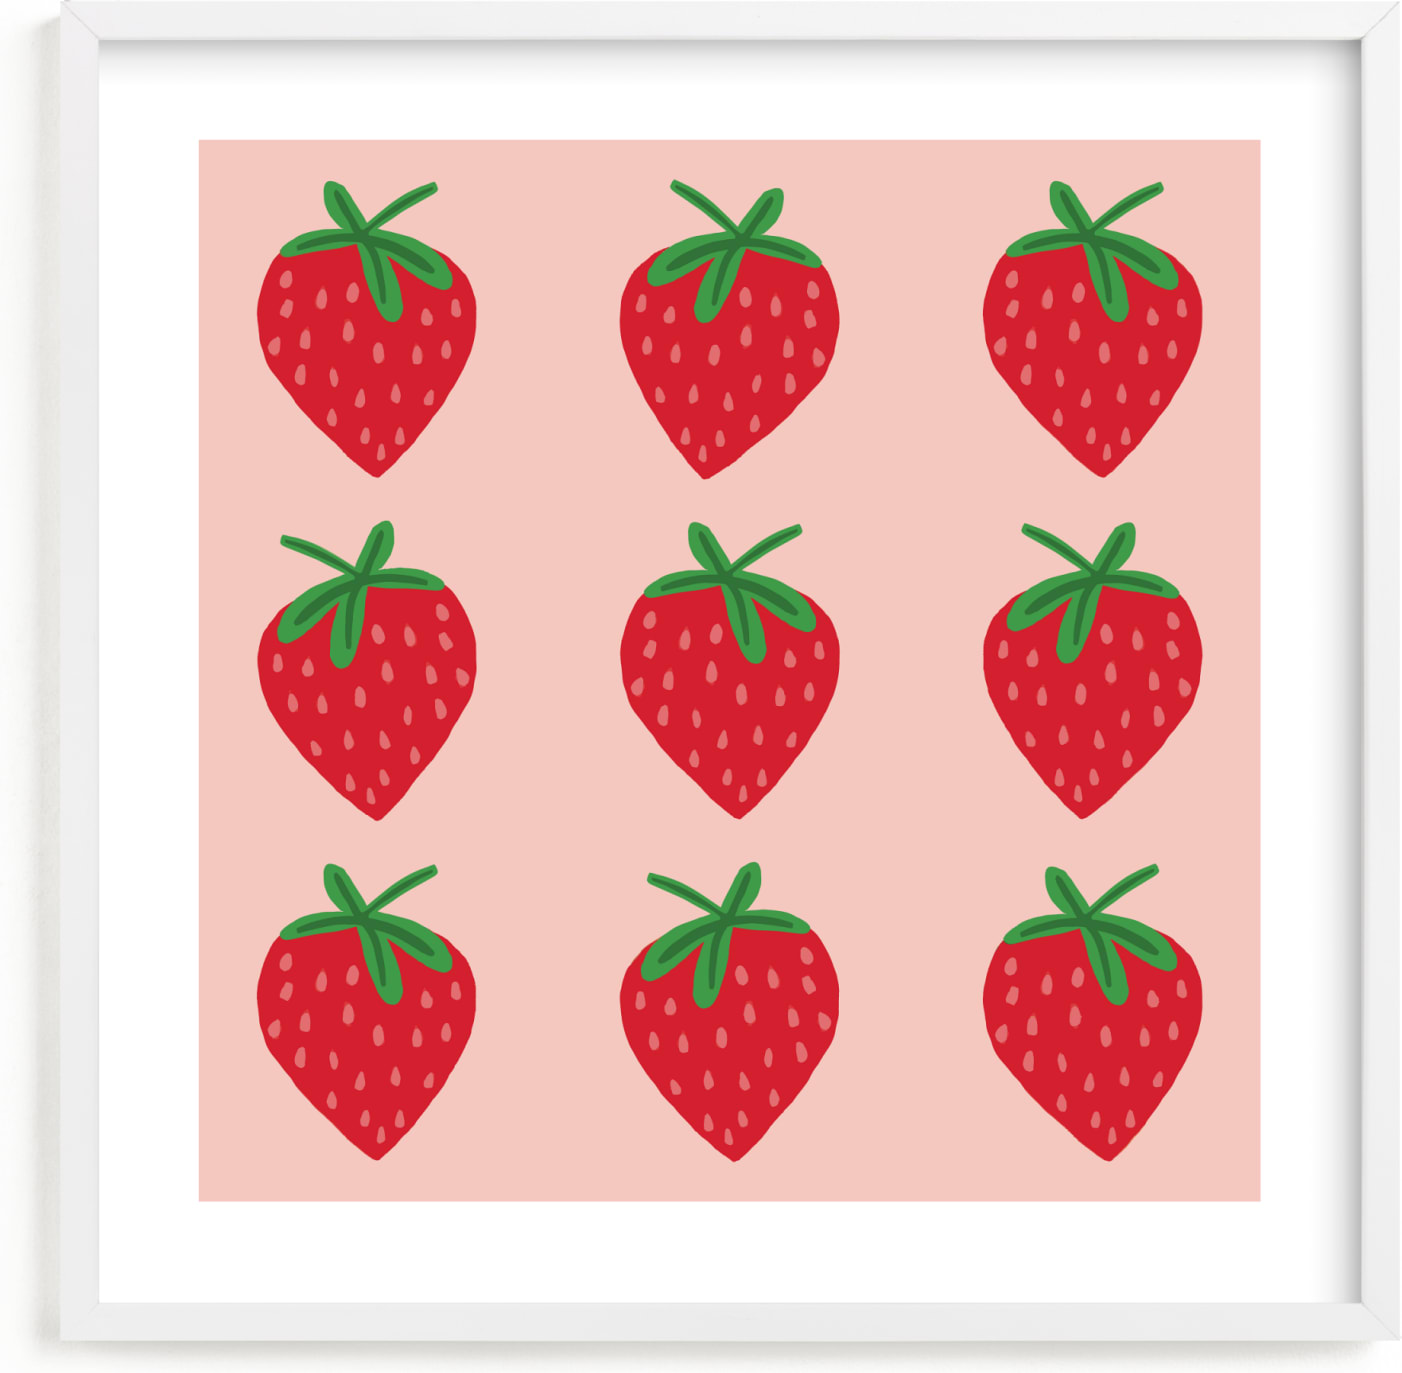 This is a pink kids wall art by Kerry Doyle called Strawberry.